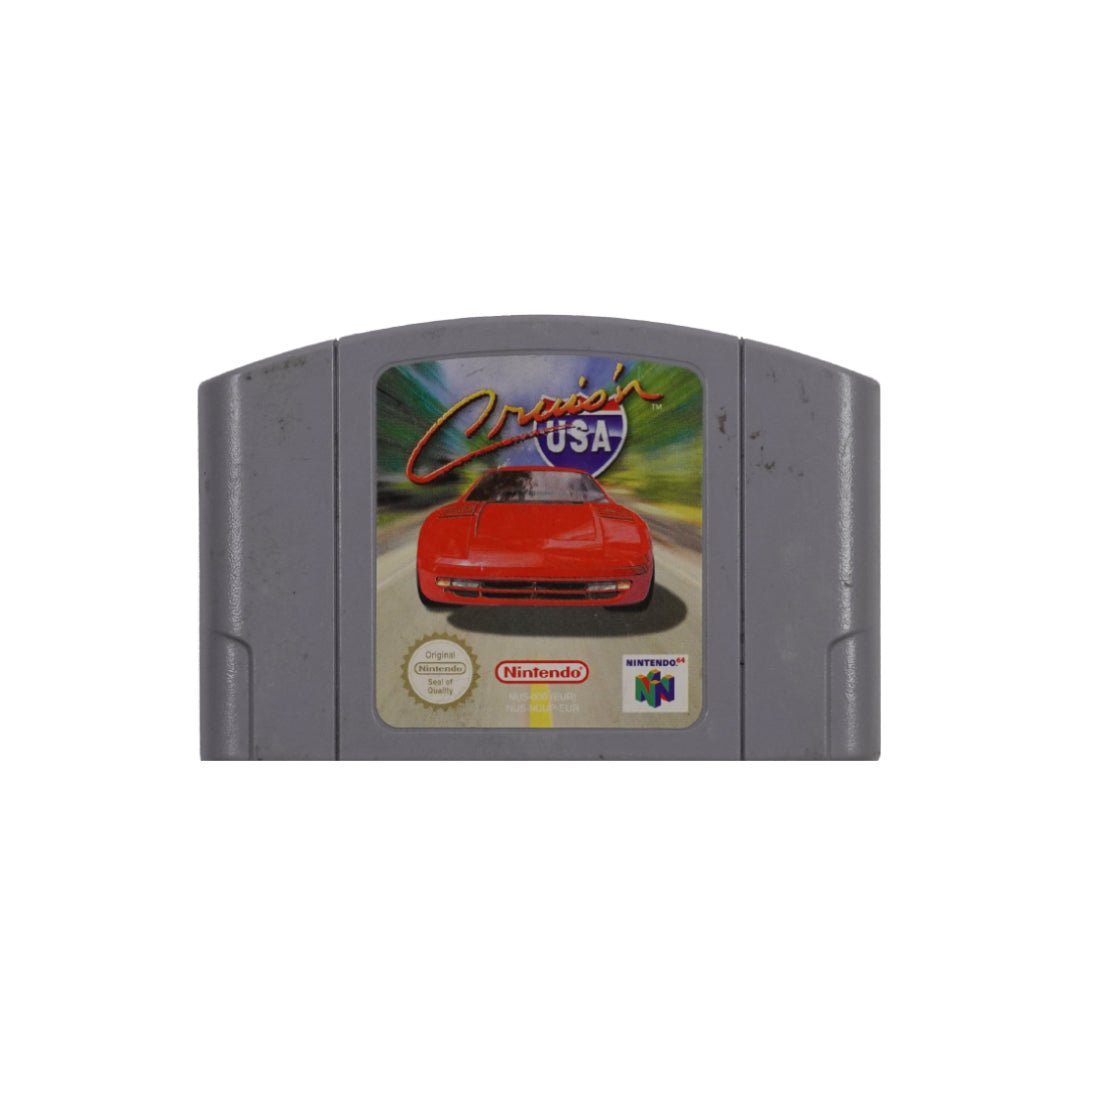 (Pre-Owned) Cuirs'n USA - Nintendo 64 - Store 974 | ستور ٩٧٤